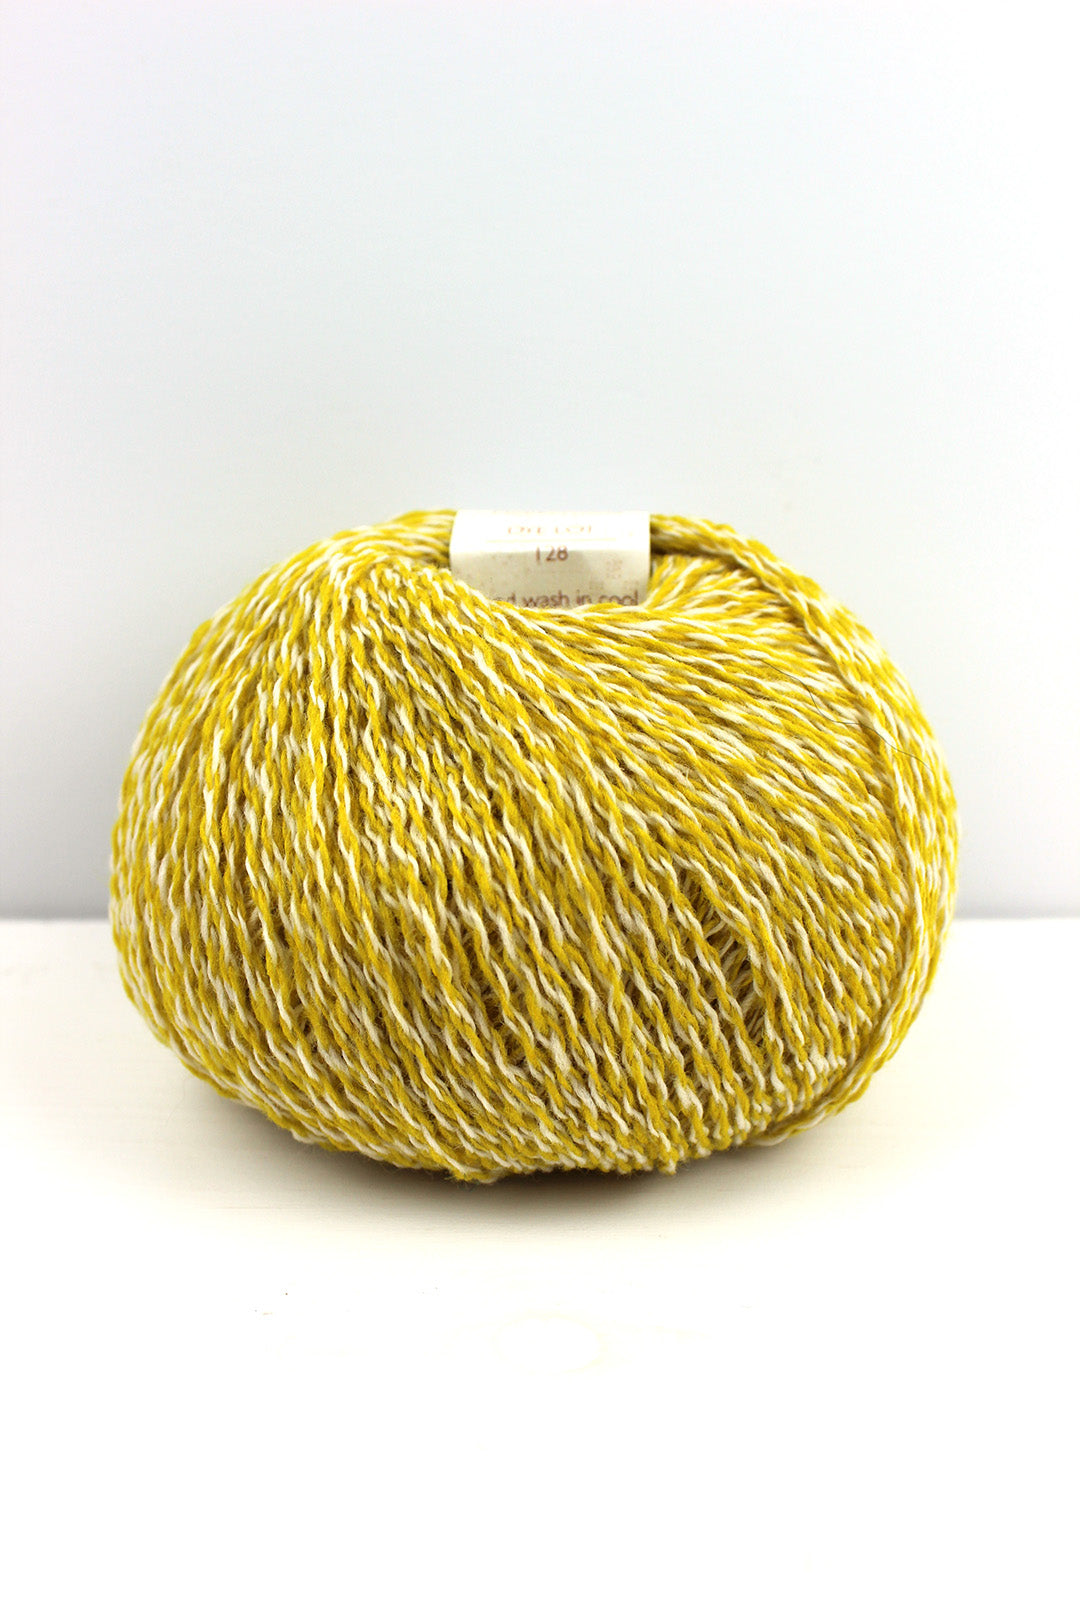 Meadowsweet knitting wool is a gorgeous blend of yellow tones. Inspired by  sweet smelling flower of damp meadows.